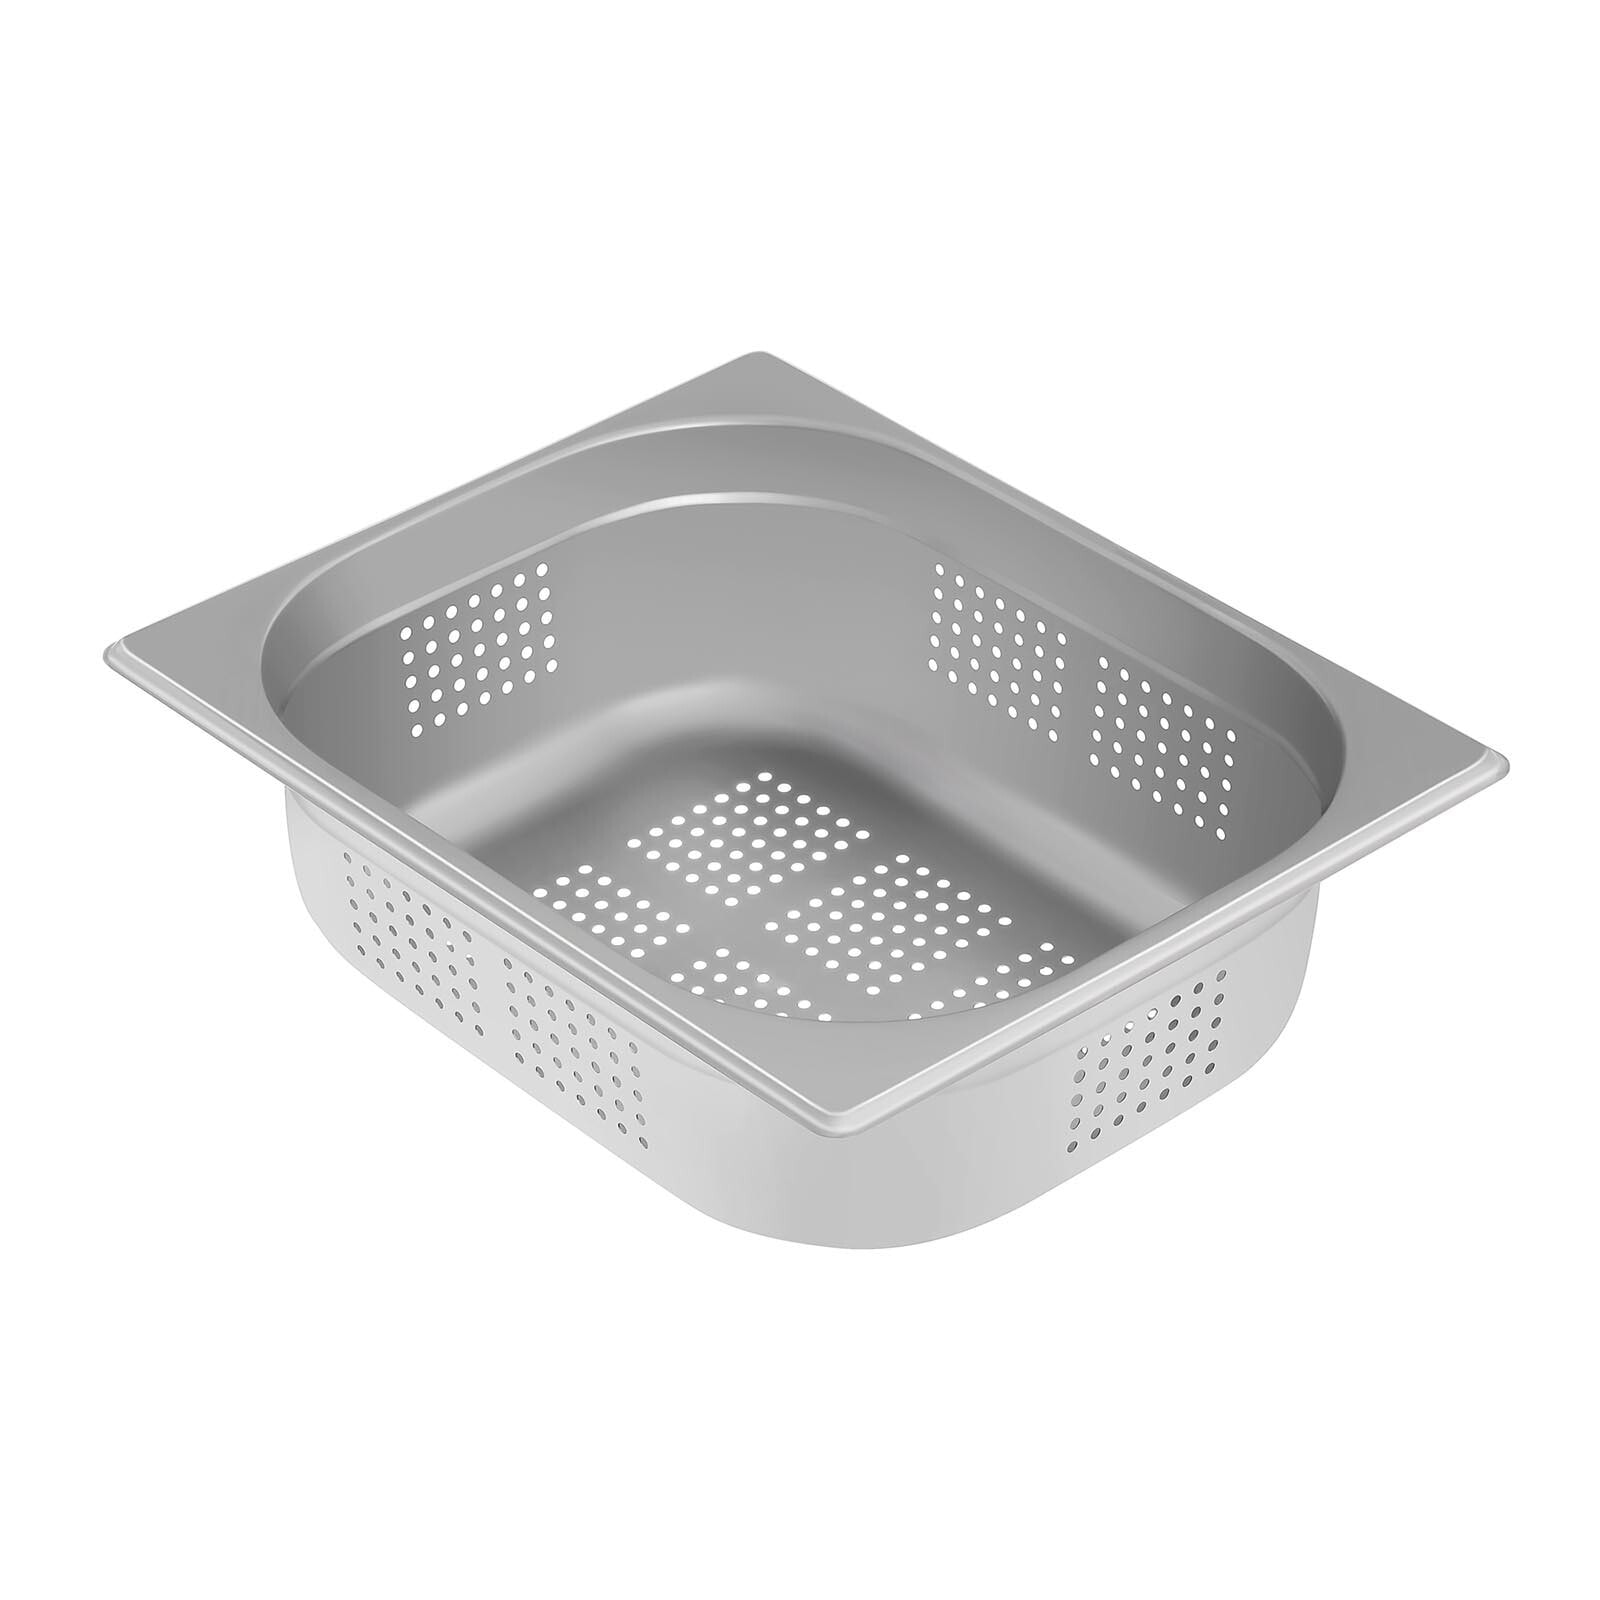 Perforated gastronomy dish made of steel GN1 / 2 depth. 100 mm